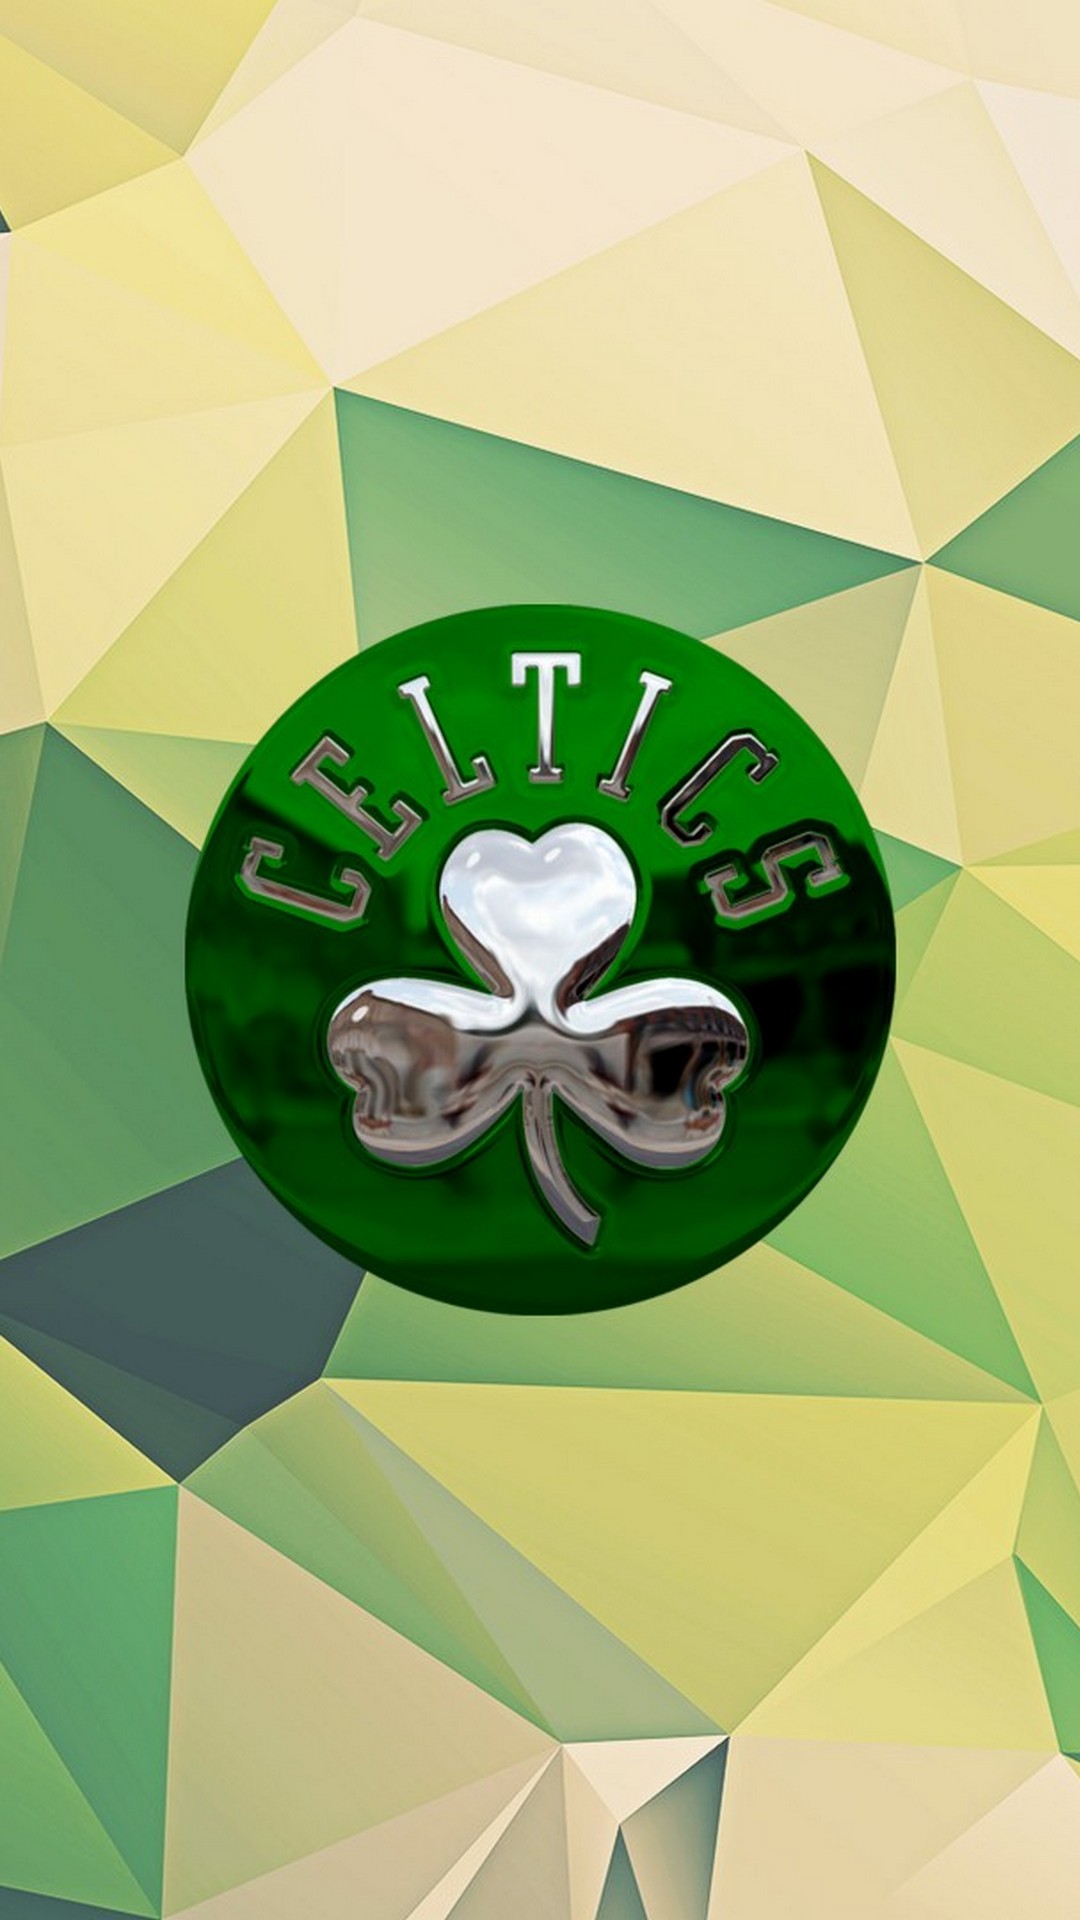 Wallpaper Android Boston Celtics With Image Resolution - Hd Boston Celtics - HD Wallpaper 